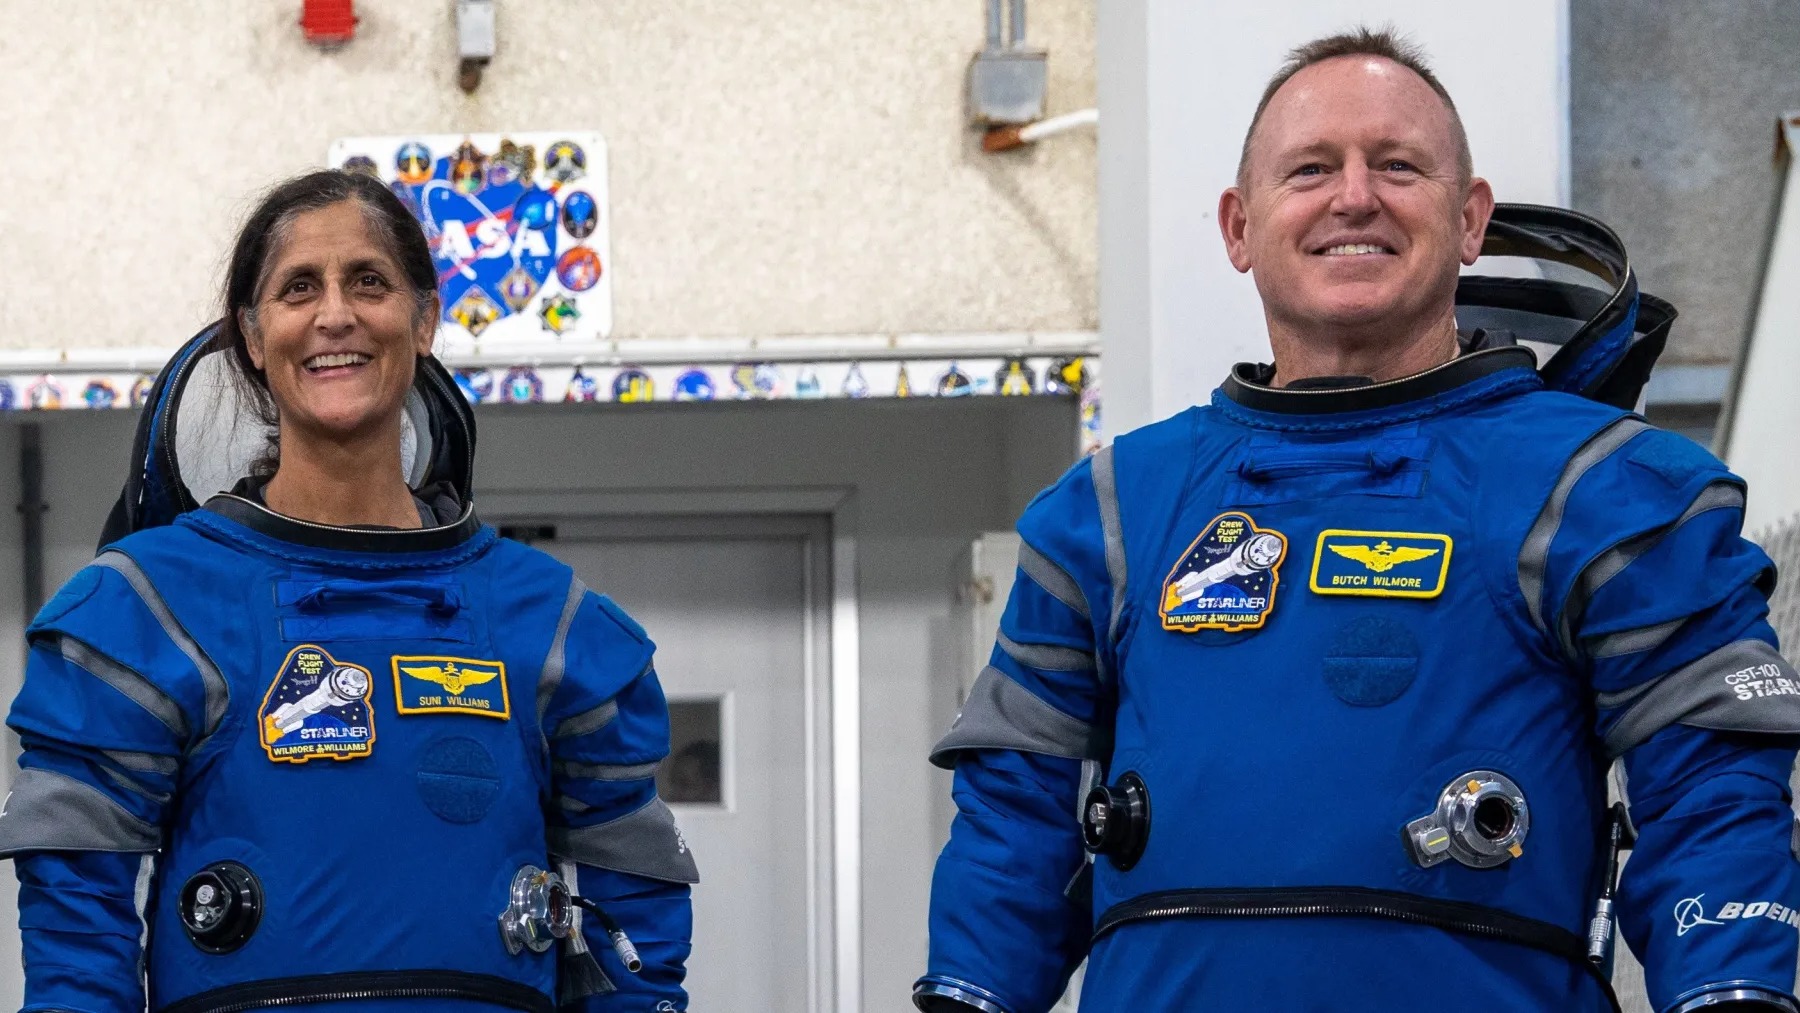 Watch live today as NASA astronauts fly to launch site for 1st crewed Boeing Starliner mission to ISS Space